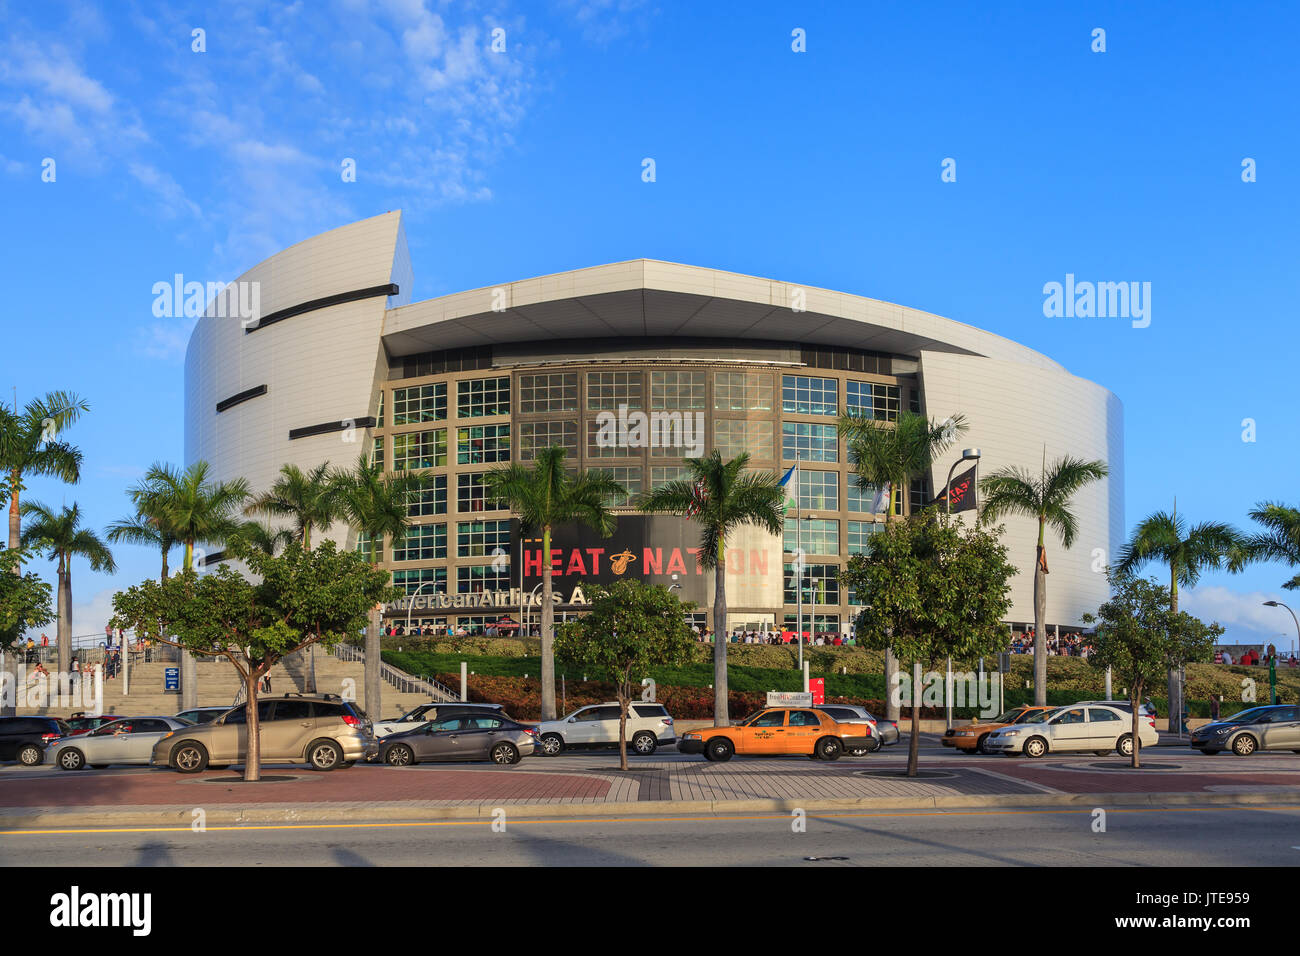 The American Airlines Arena in Miami, Florida.  The arena, opened in 1999, is a sport and entertainment venue and is home to Miami Heat. Stock Photo